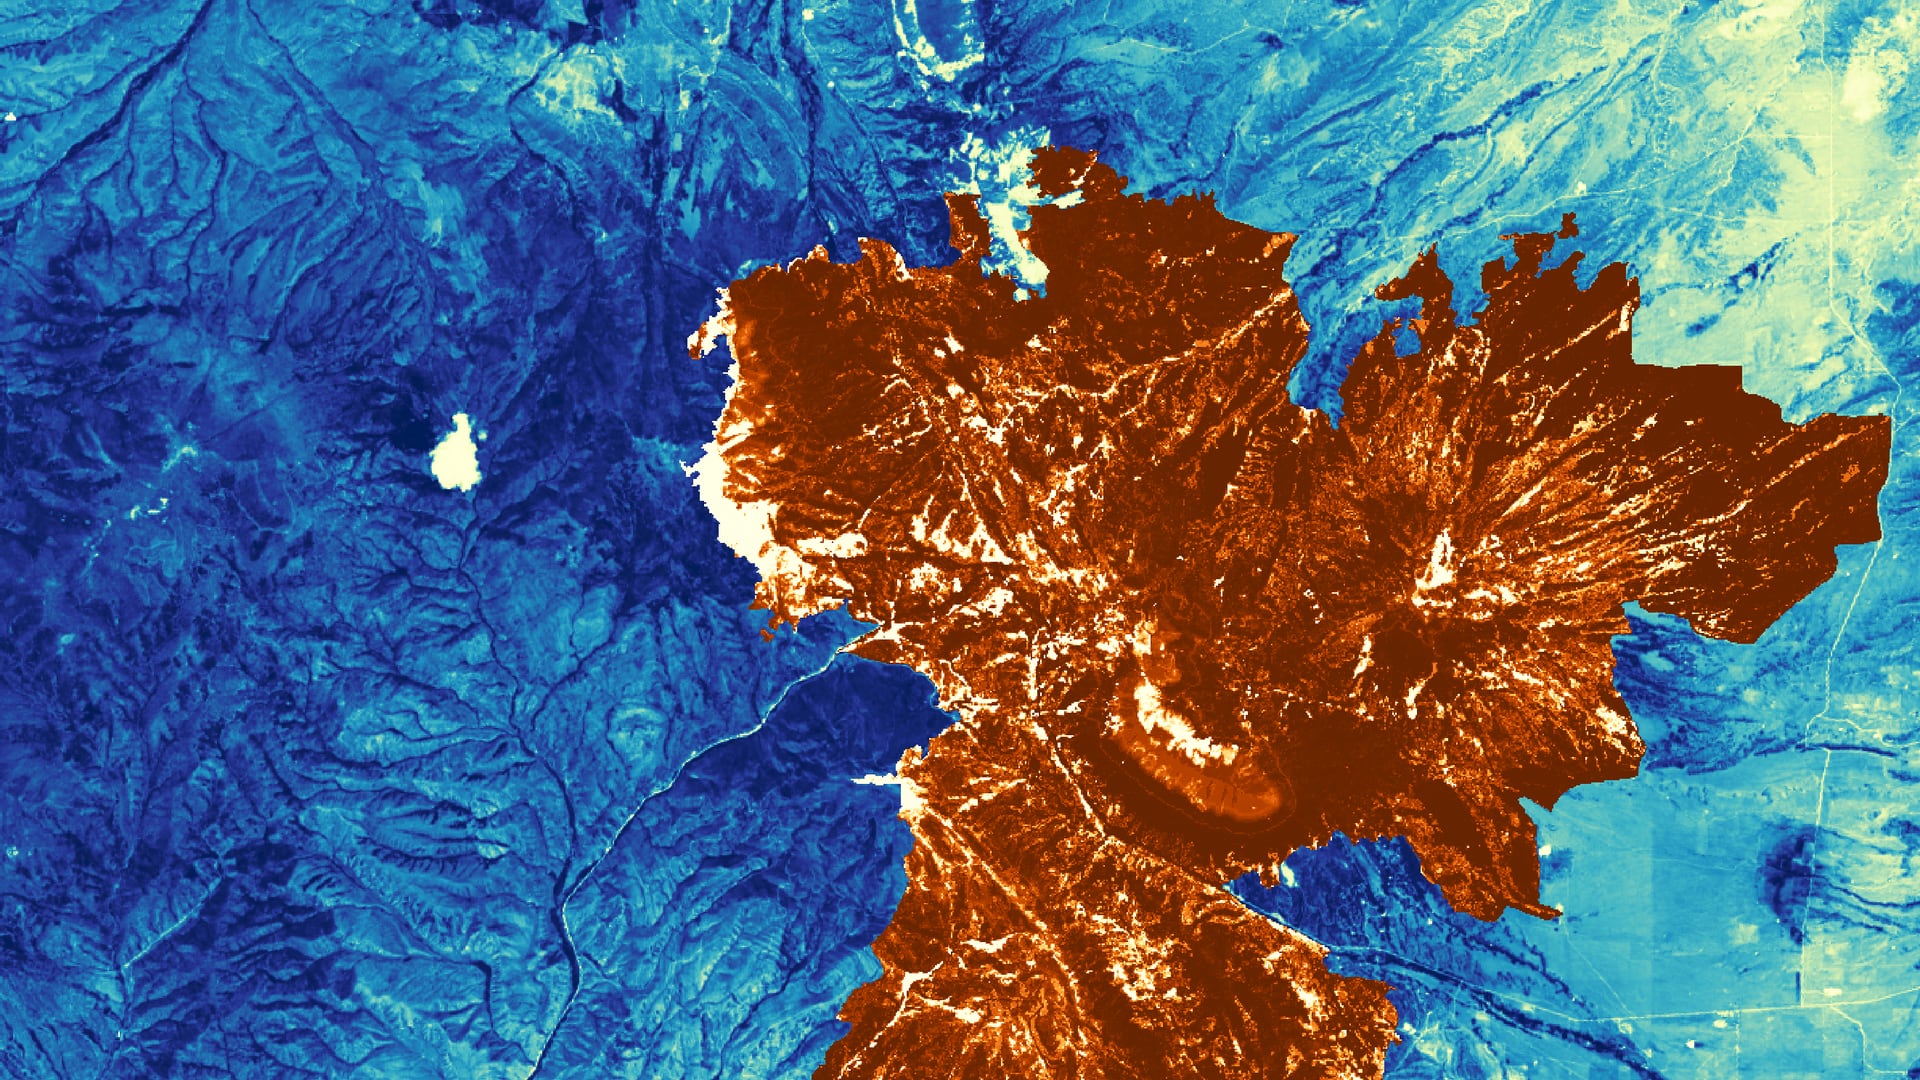 A model-produced feasibility map of aspen regeneration after the Spring Creek wildfire in 2018, (extent shown in red). This was overlaid on an NDVI-composite produced from Landsat 8 OLI Tier 1 surface reflectance (September 2019)(shown in shades of blue) of Trinchera Ranch in Southern Colorado. The model was trained on data from Landsat 8 OLI/TIRS, Sentinel-2 MSI, and SRTM from the Summer of 2017 and 2019 (before and after the fire, respectively). Areas most suitable for aspen regeneration after the disturbance are in yellow.   Keywords: Aspen, Wildfire, NDVI, Random Forest, Spring Creek, La Veta, Colorado, Landsat, Sentinel